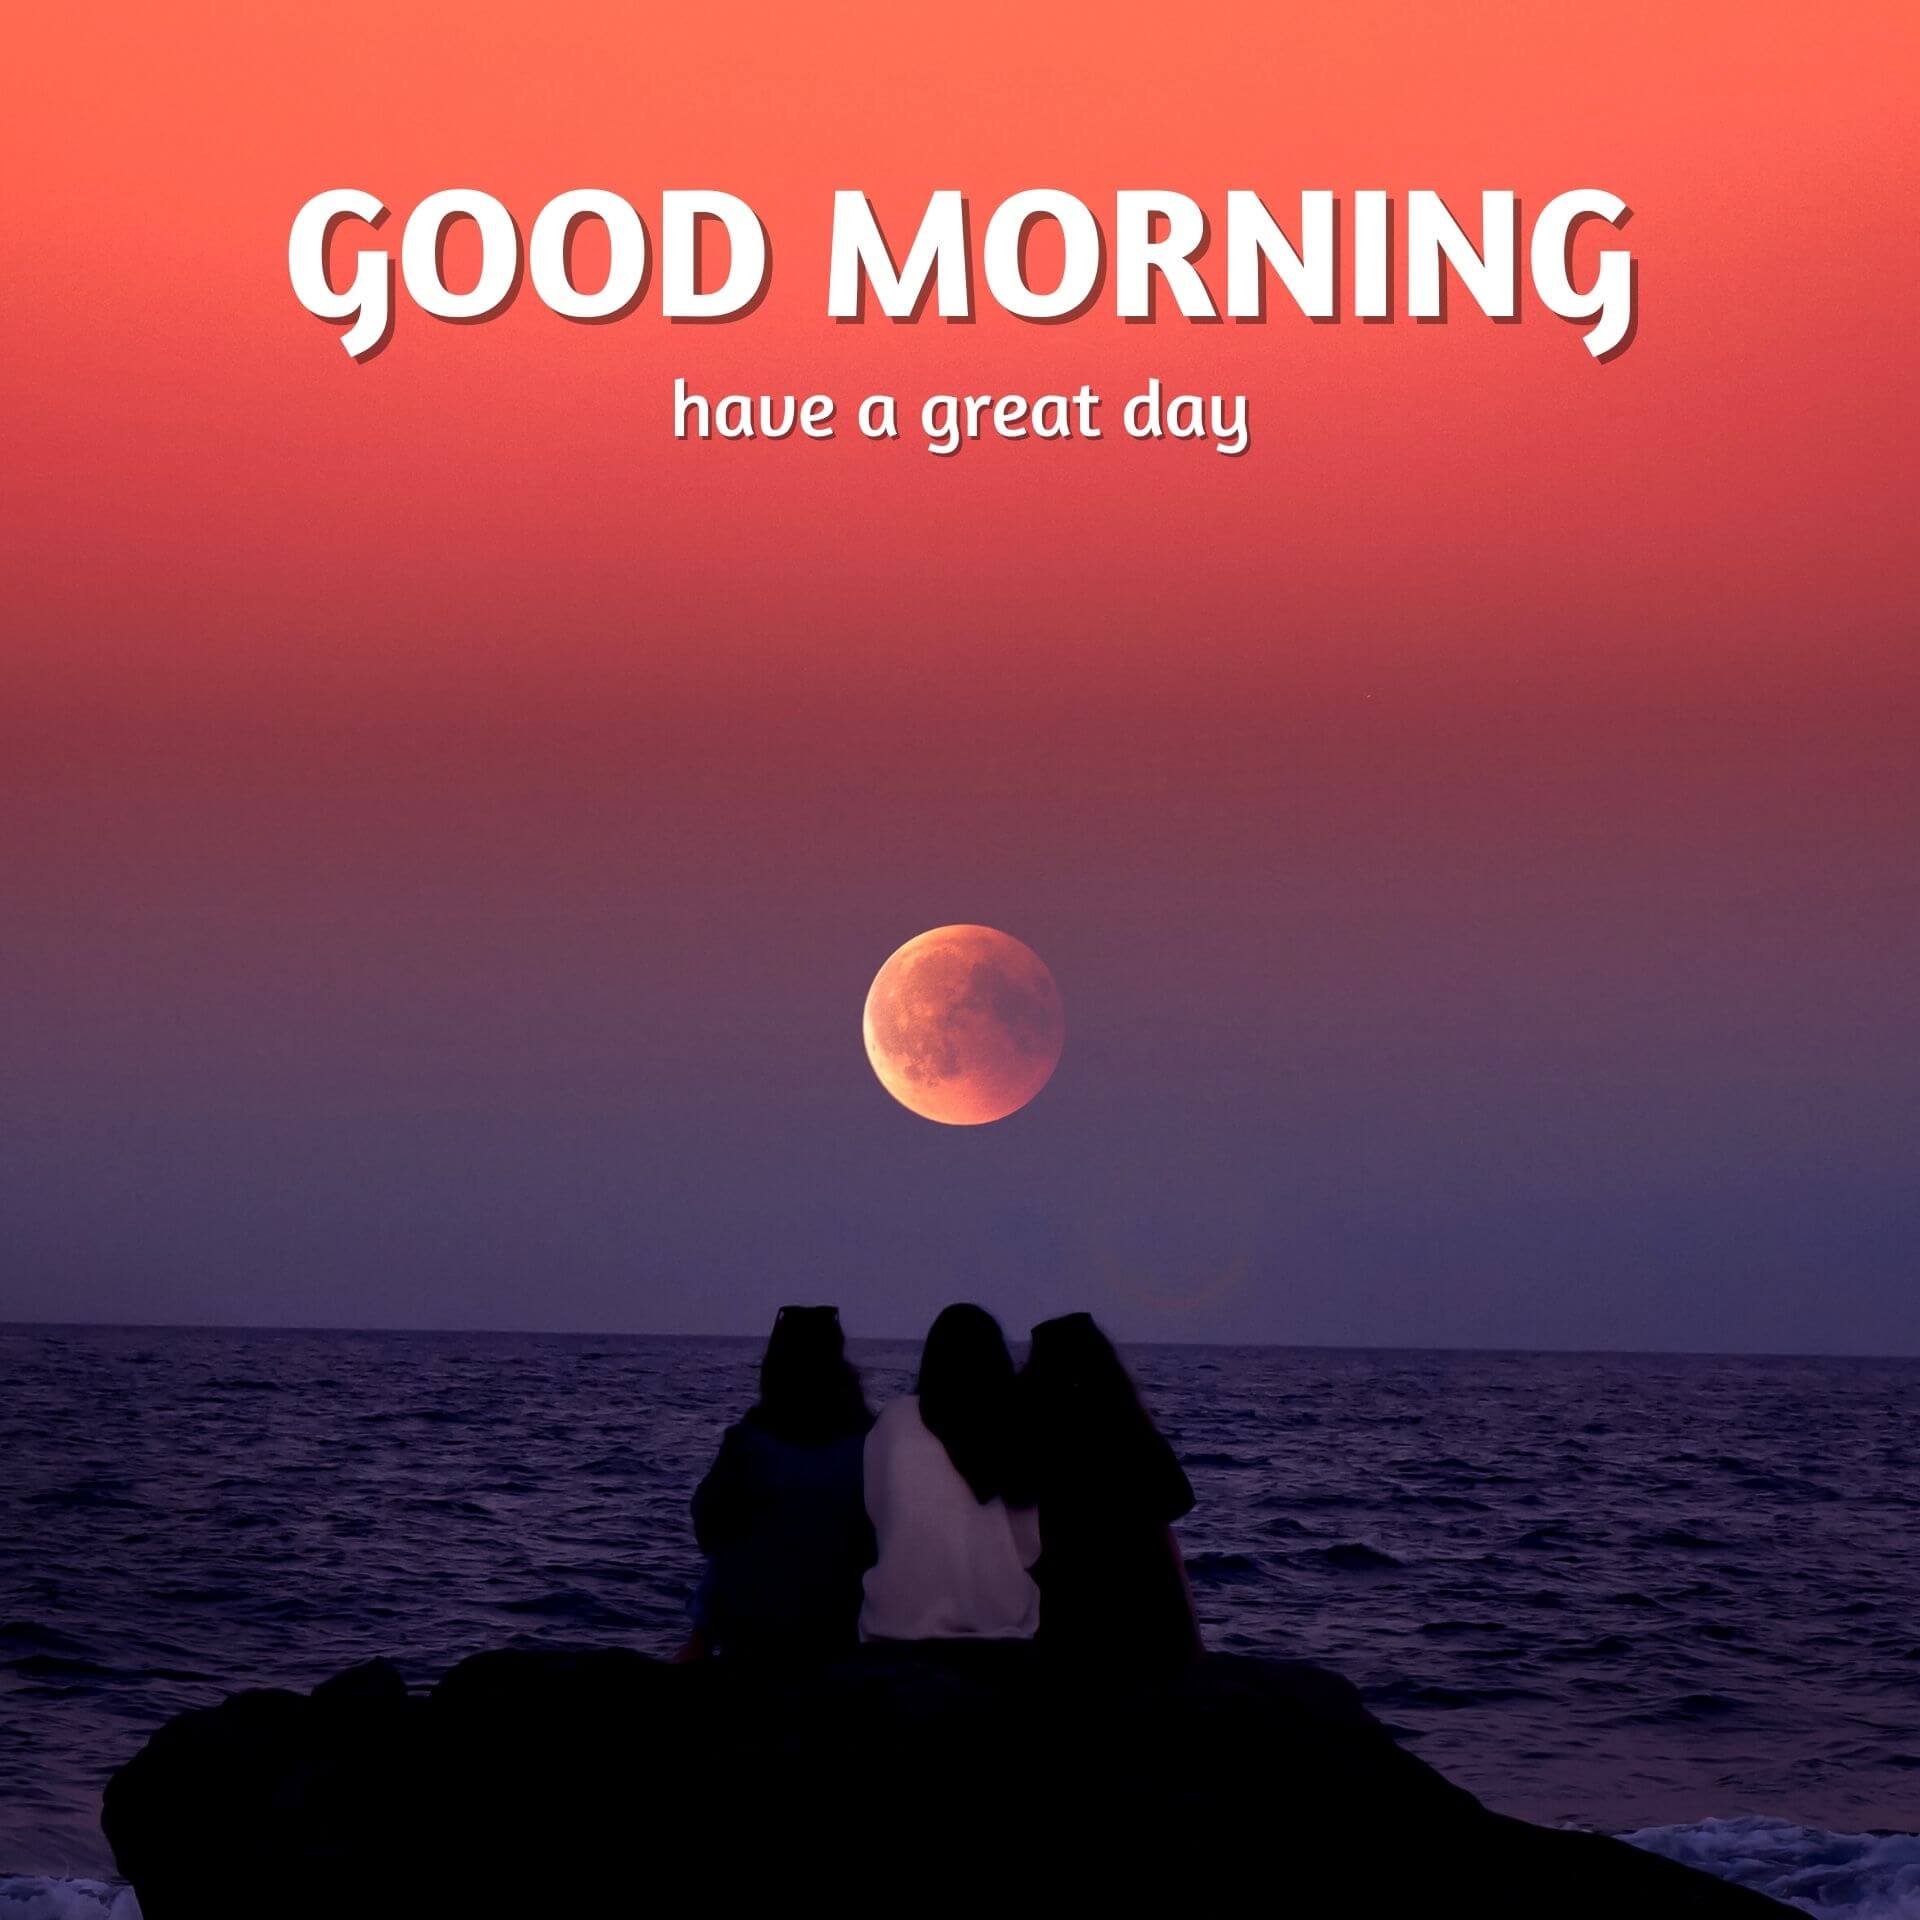 Friend Good Morning Images